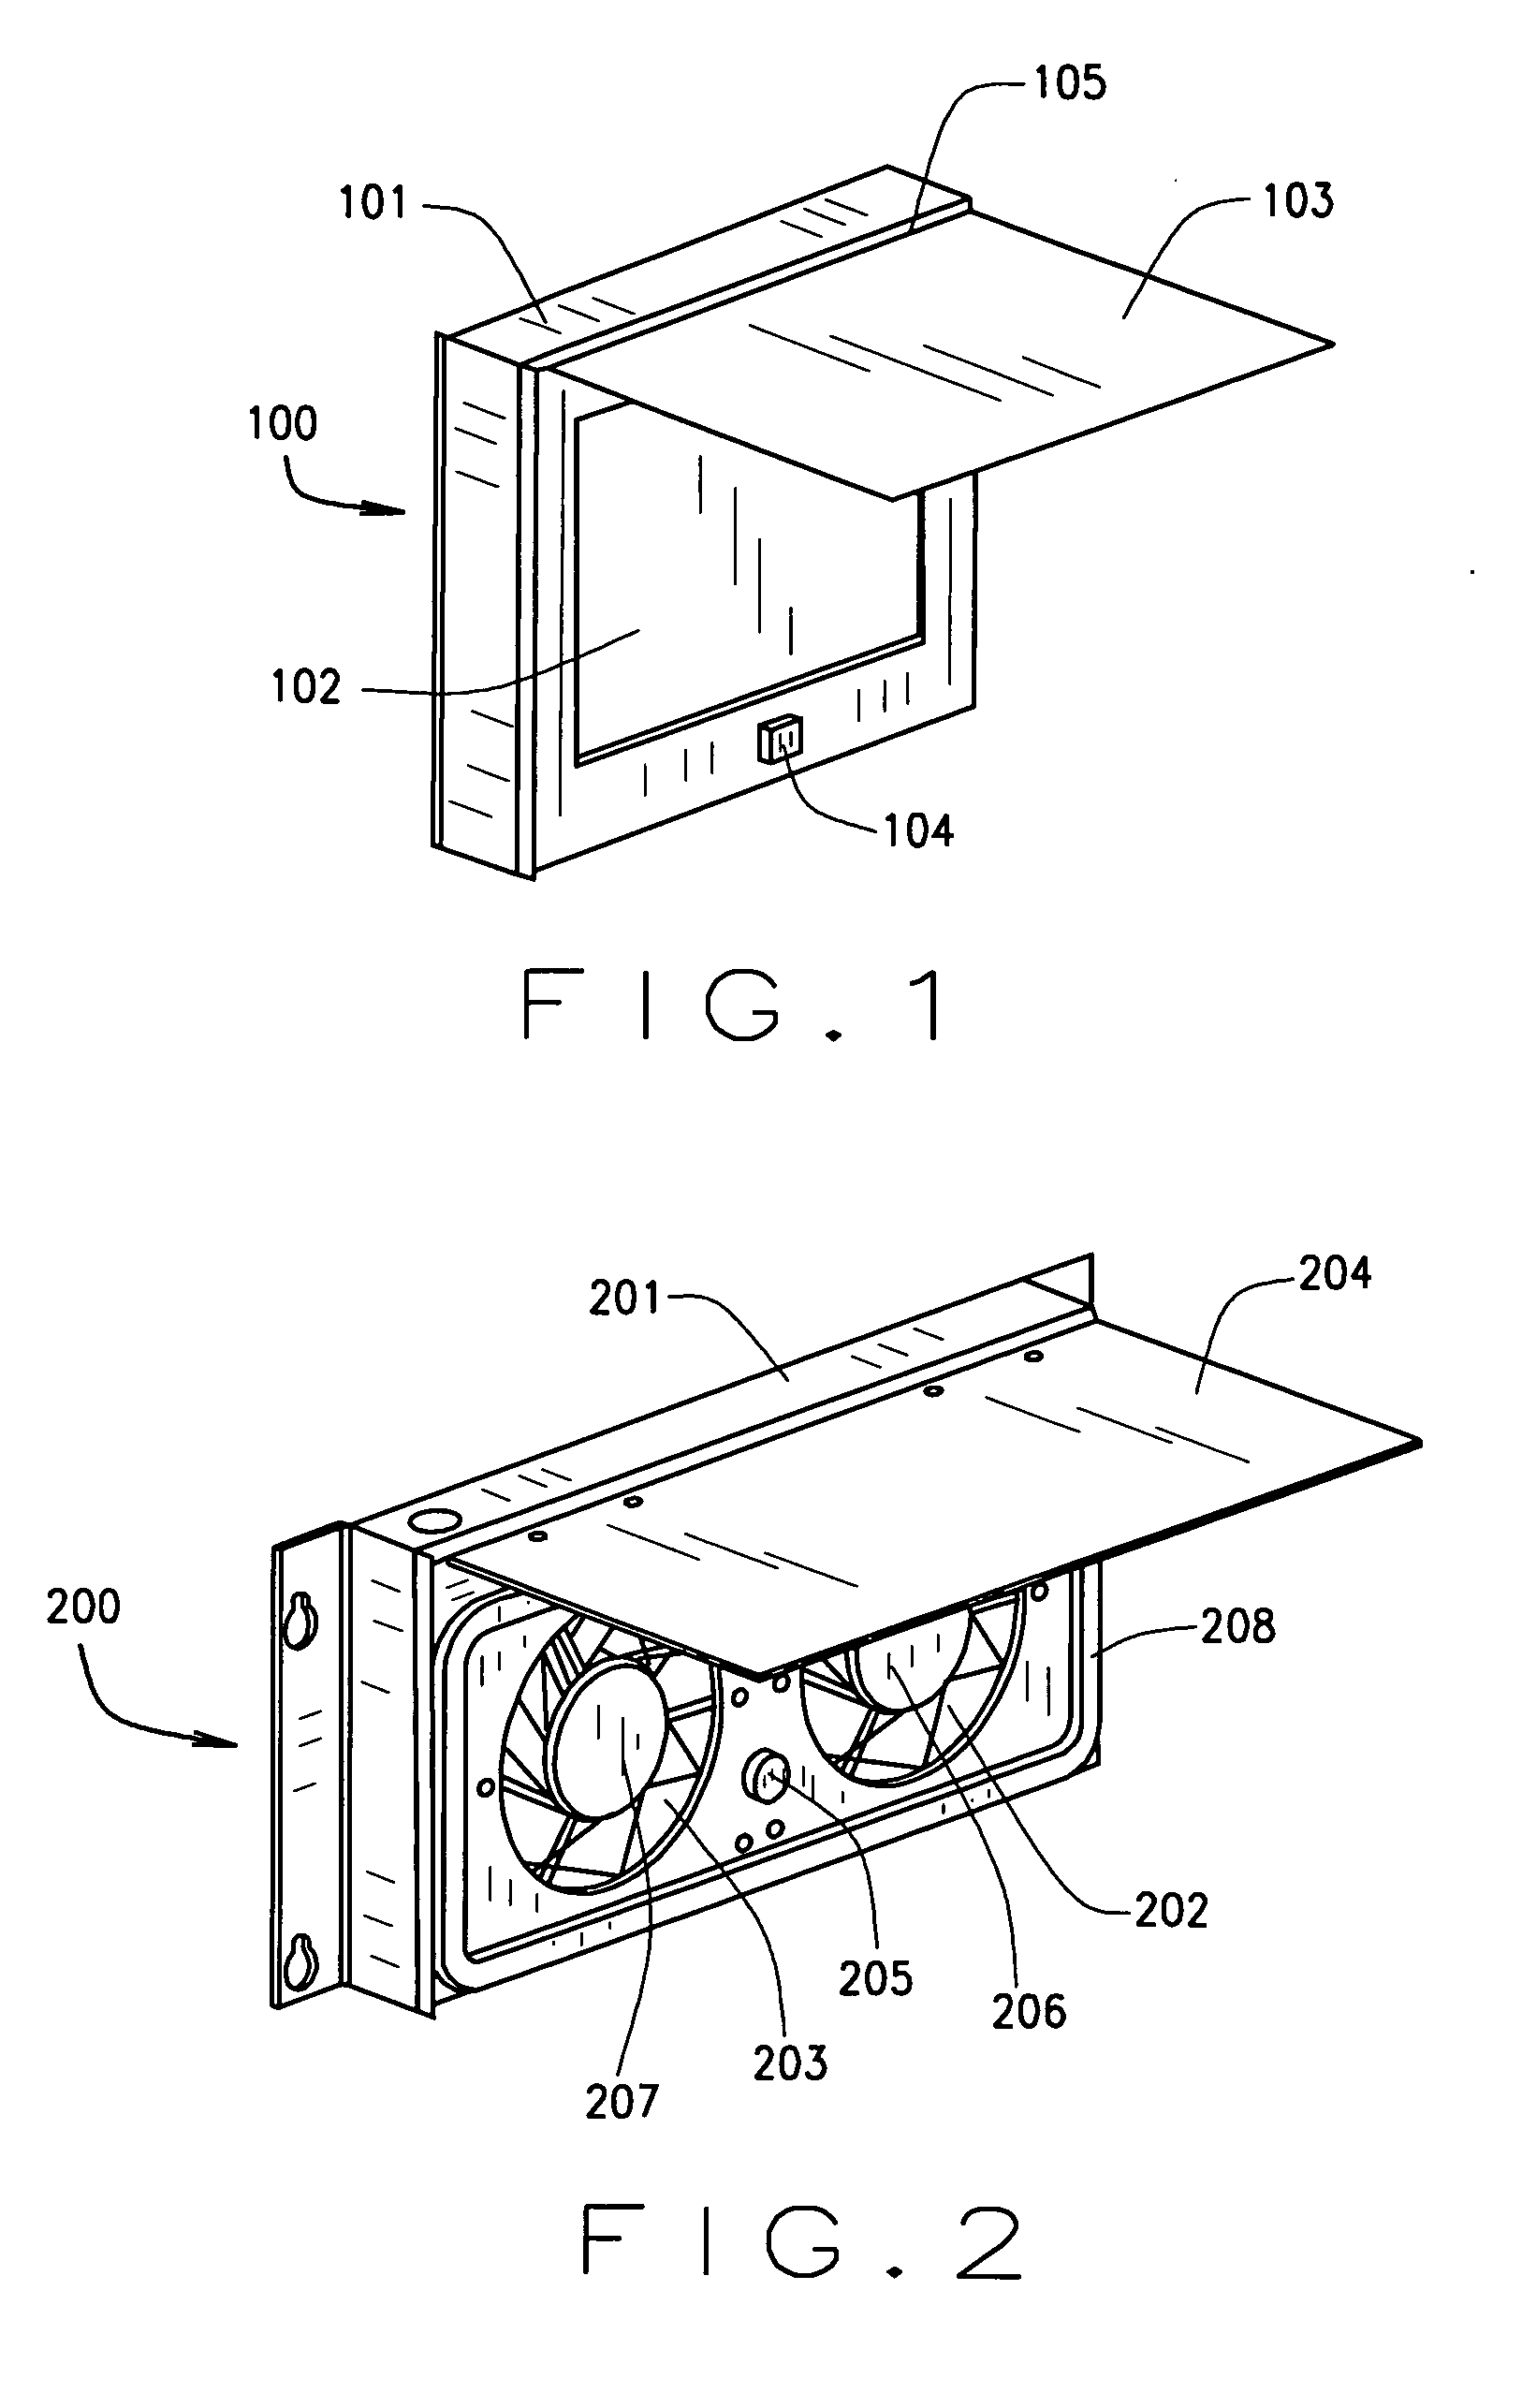 Electromagnet-assisted ventilation cover for an electronic equipment enclosure